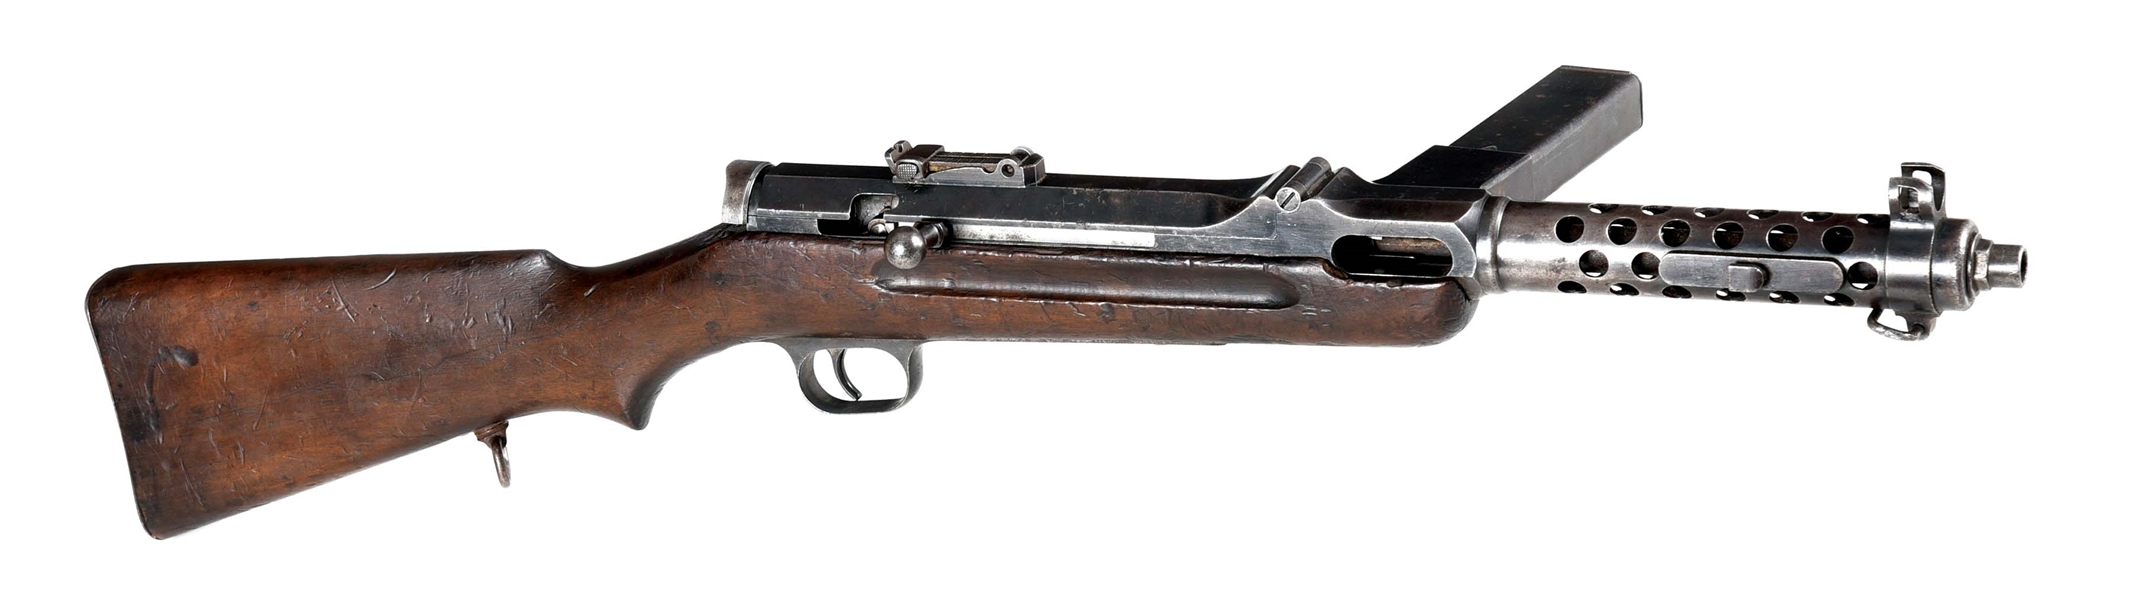 (N) VERY SCARCE AND SOUGHT AFTER STEYR MP-34 MACHINE GUN IN .45 ACP (PRE-86 DEALER SAMPLE).